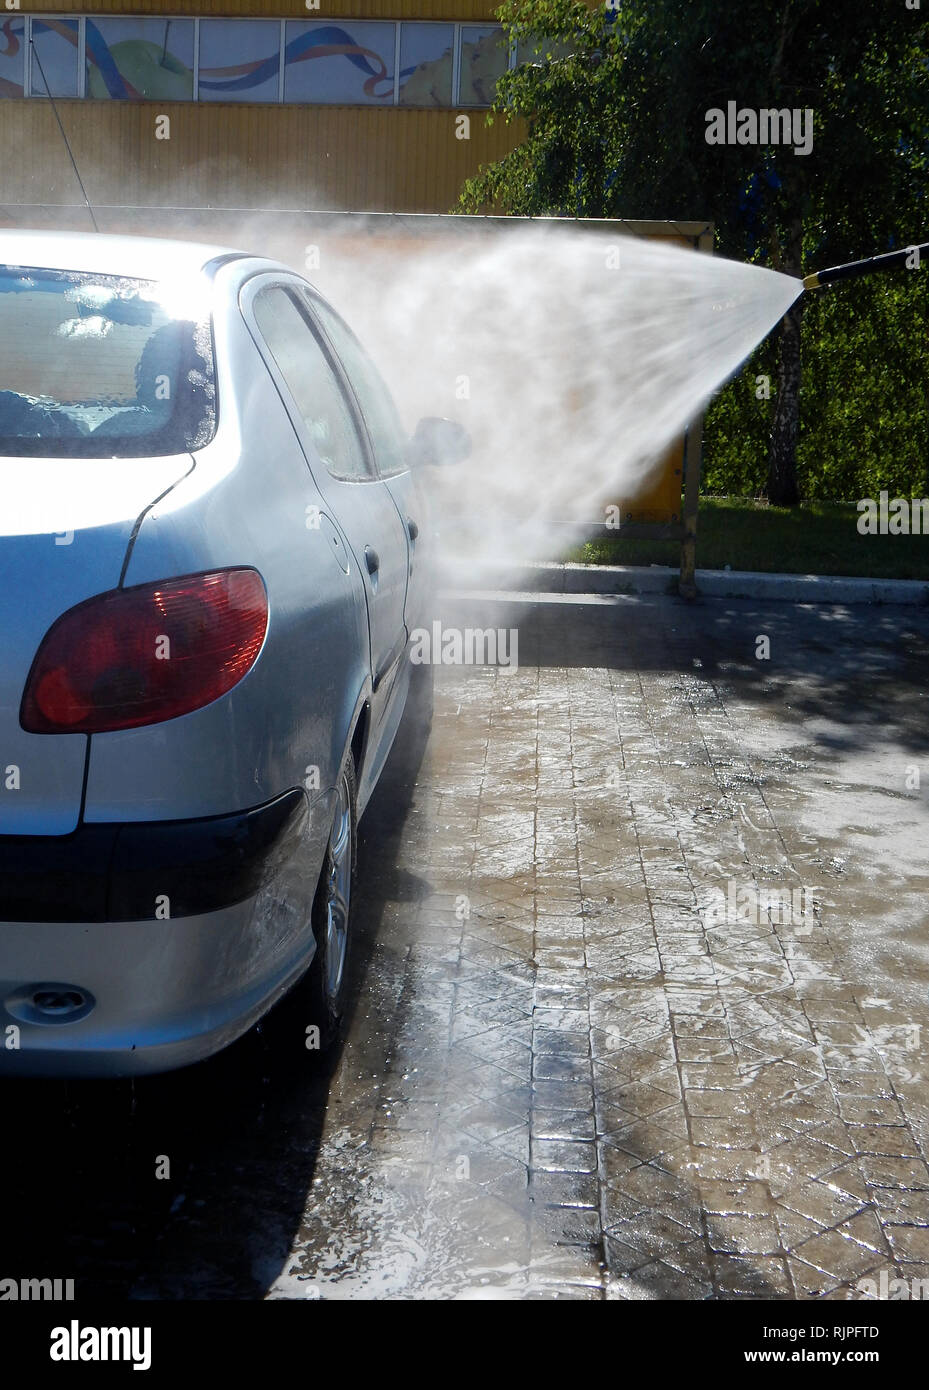 Car washing by high pressure jet washer Stock Photo